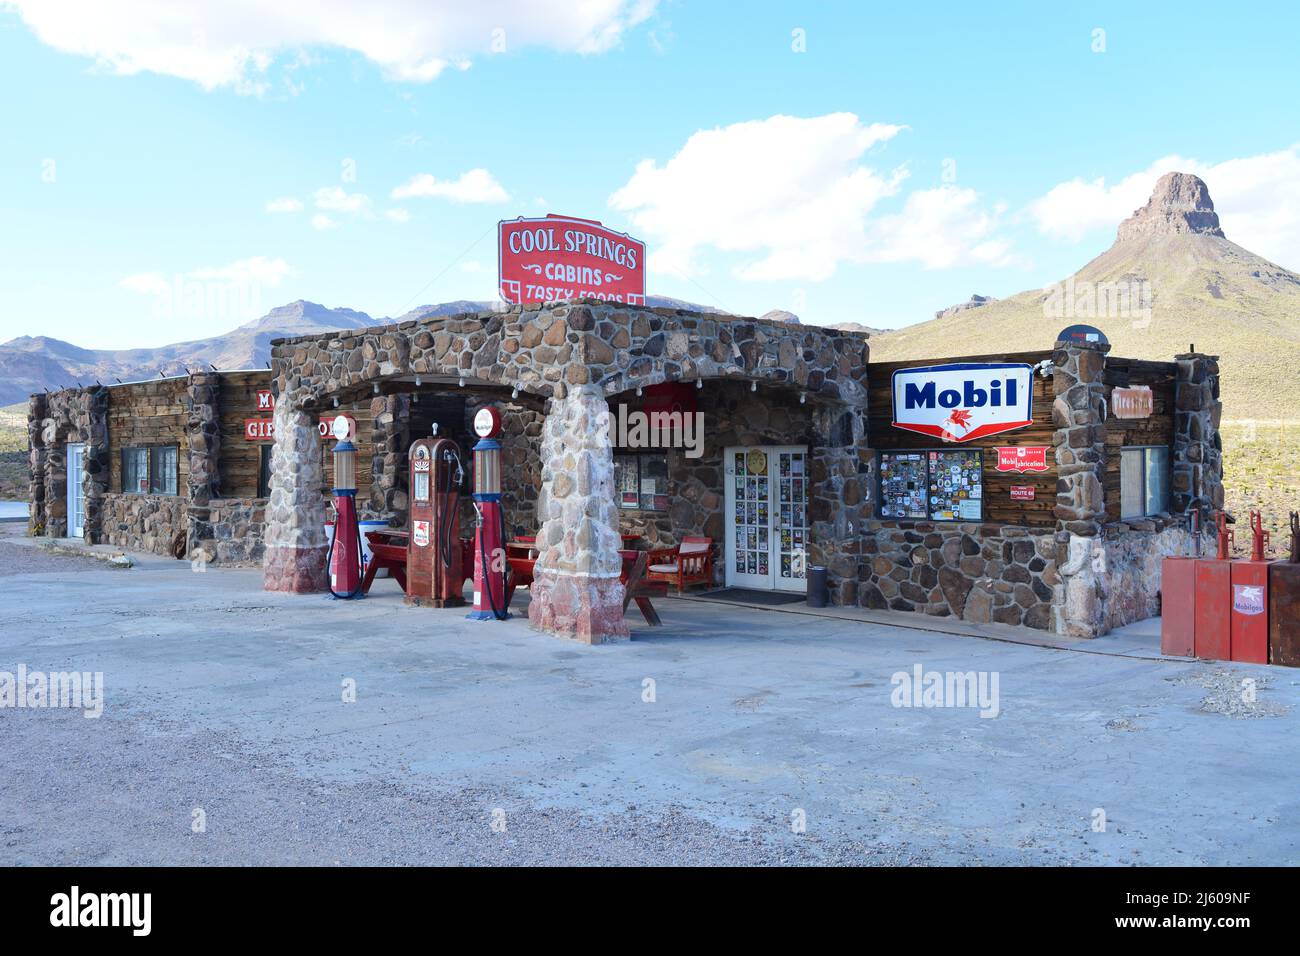 Old gas station on Route 66, Cool Spring, Arizona Stock Photo